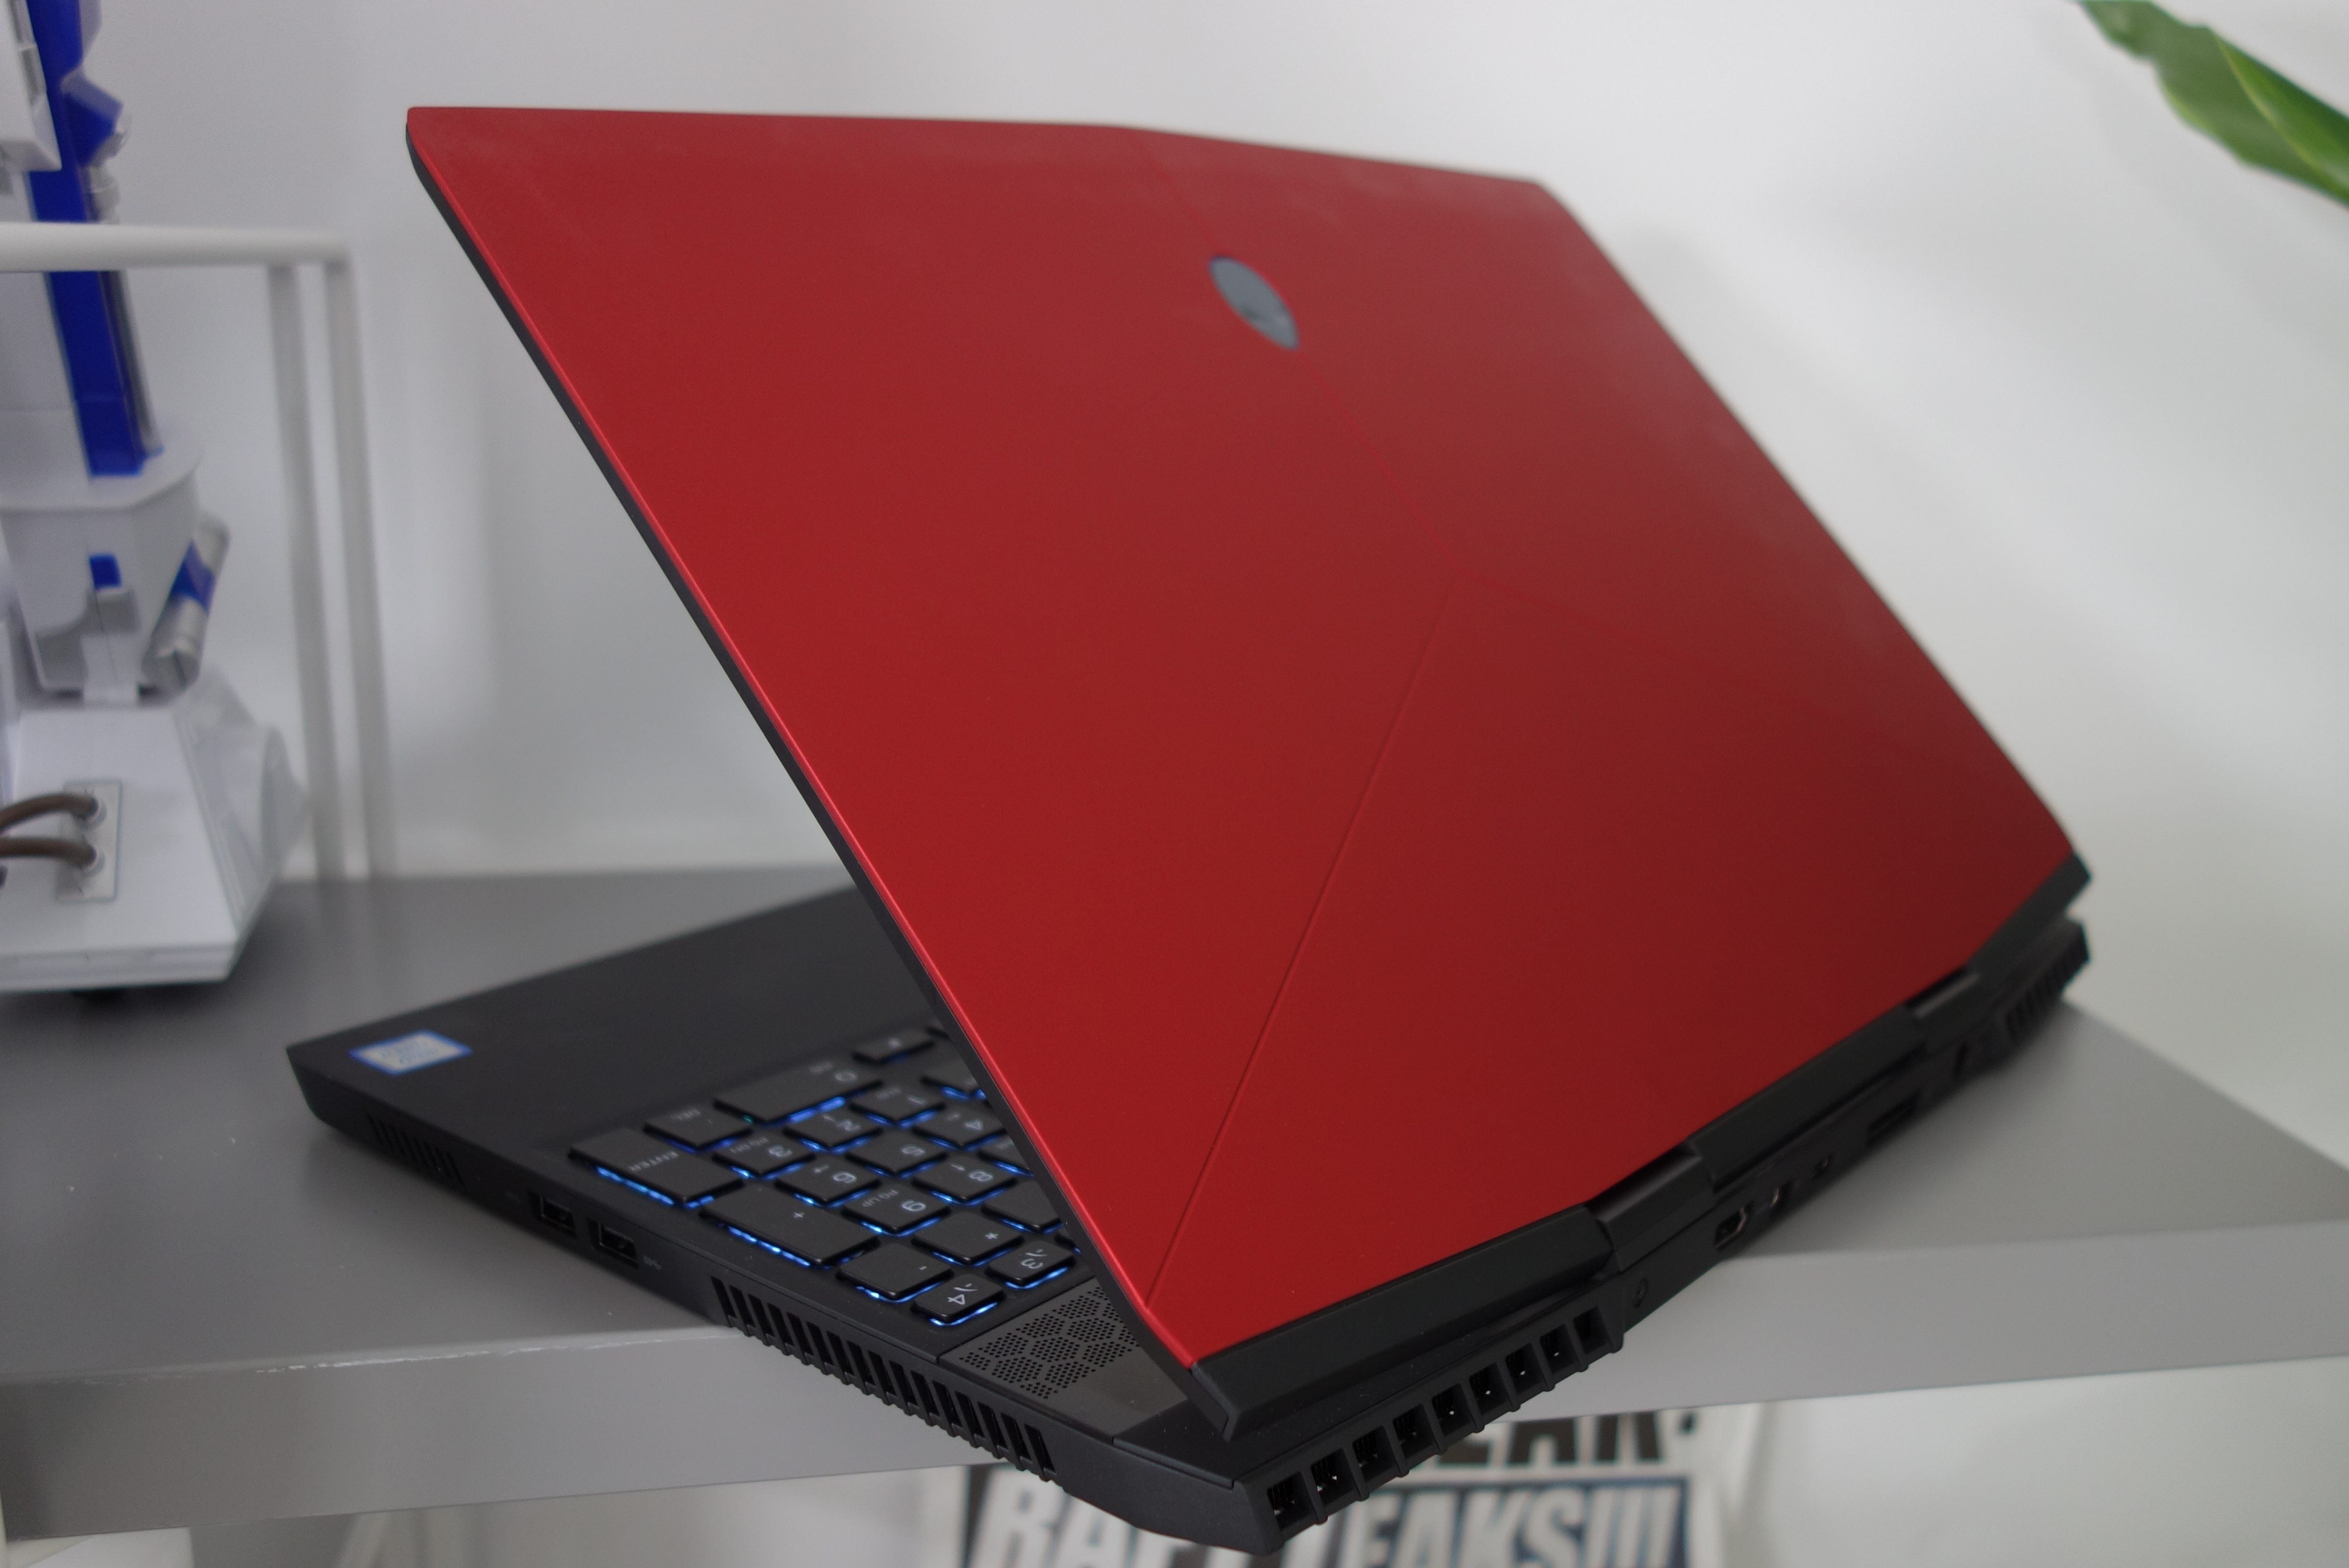 Alienware m15 Review | Trusted Reviews